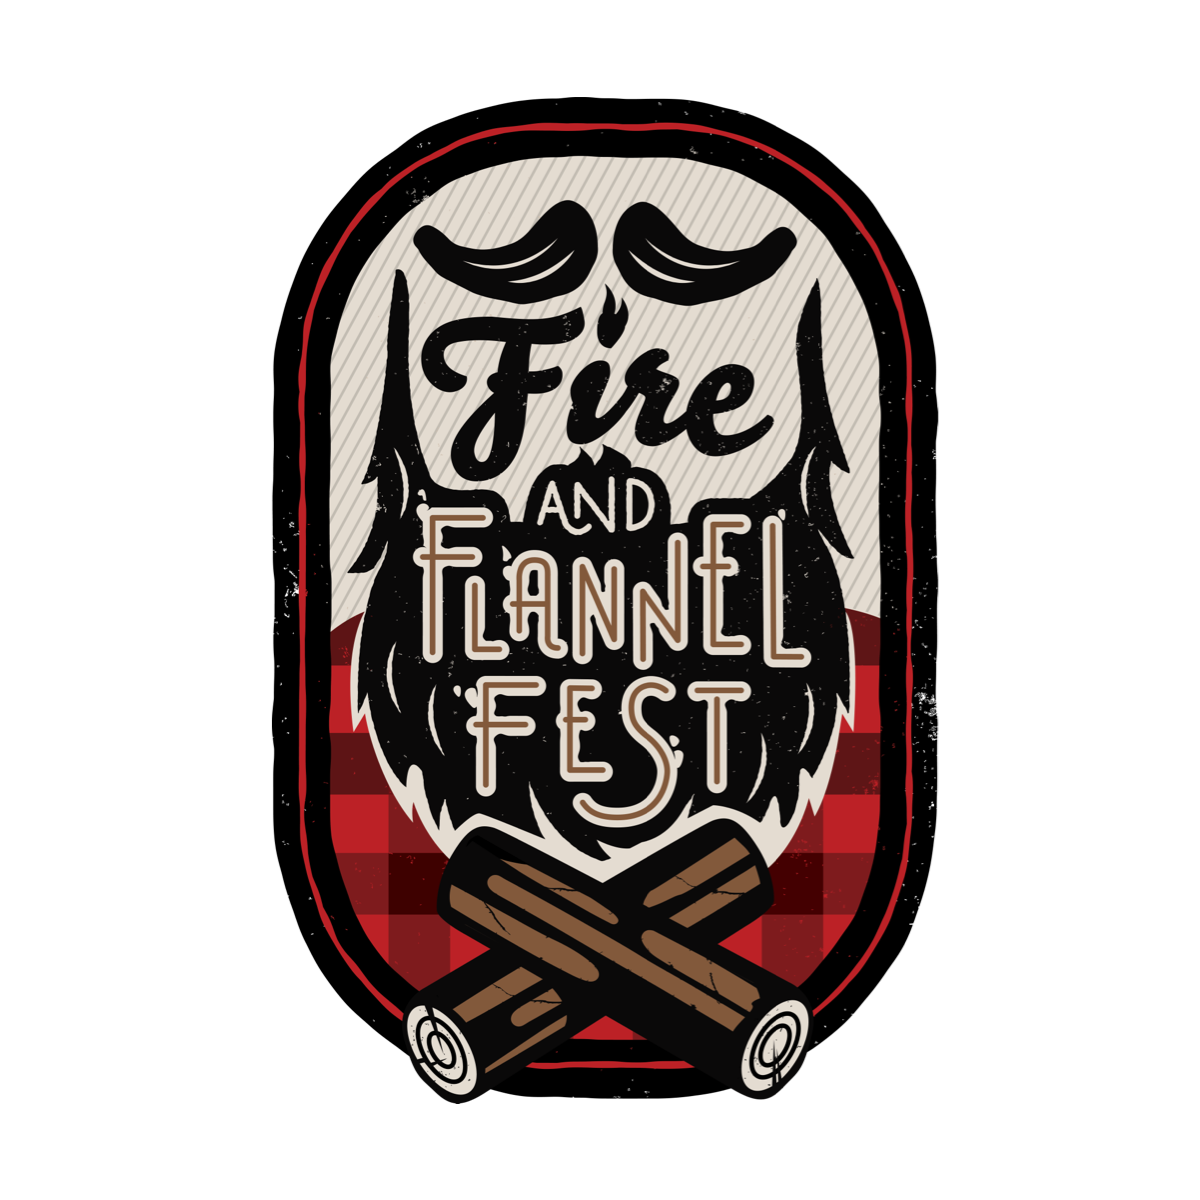 Fire and Flannel Fest logo